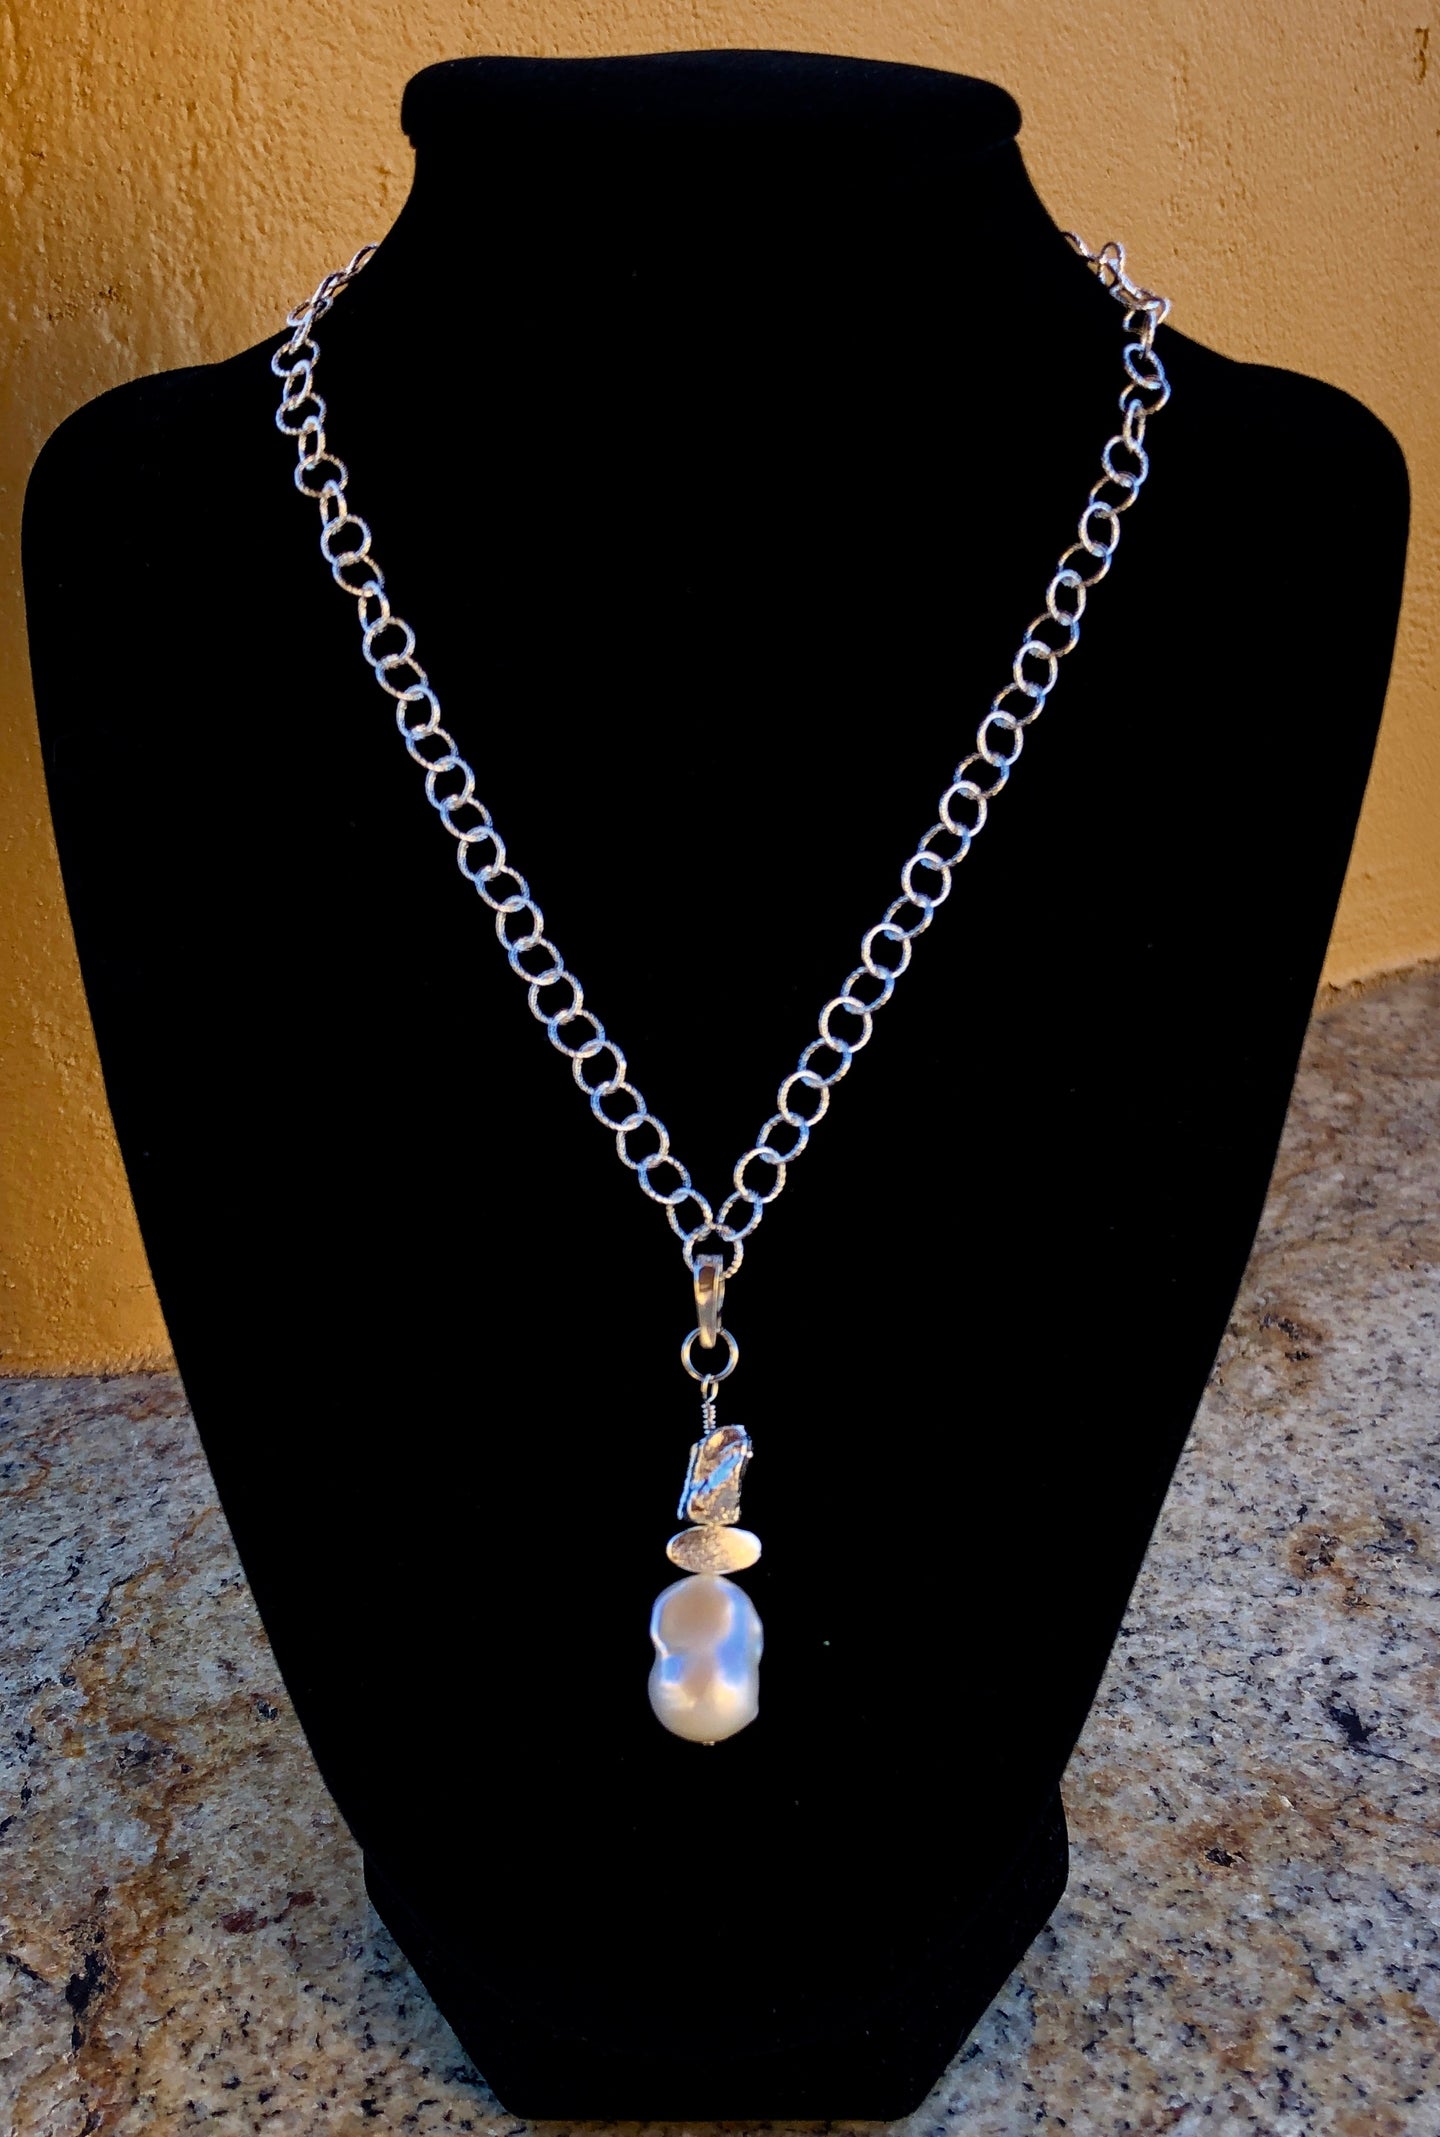 necklace - sterling silver chain with baroque pearl pendant